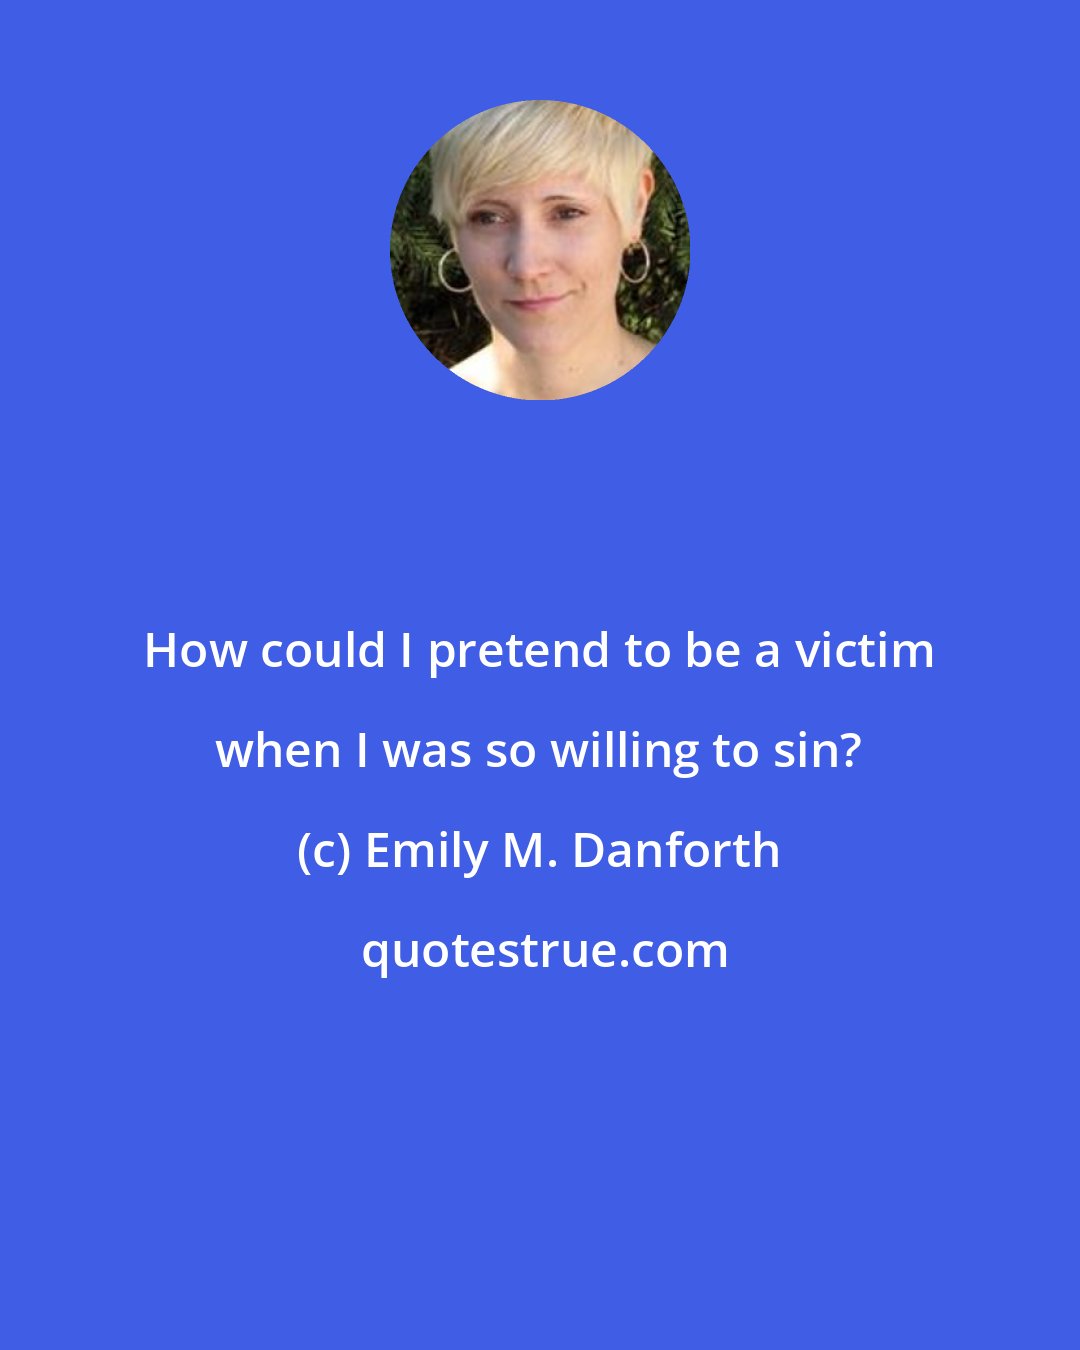 Emily M. Danforth: How could I pretend to be a victim when I was so willing to sin?